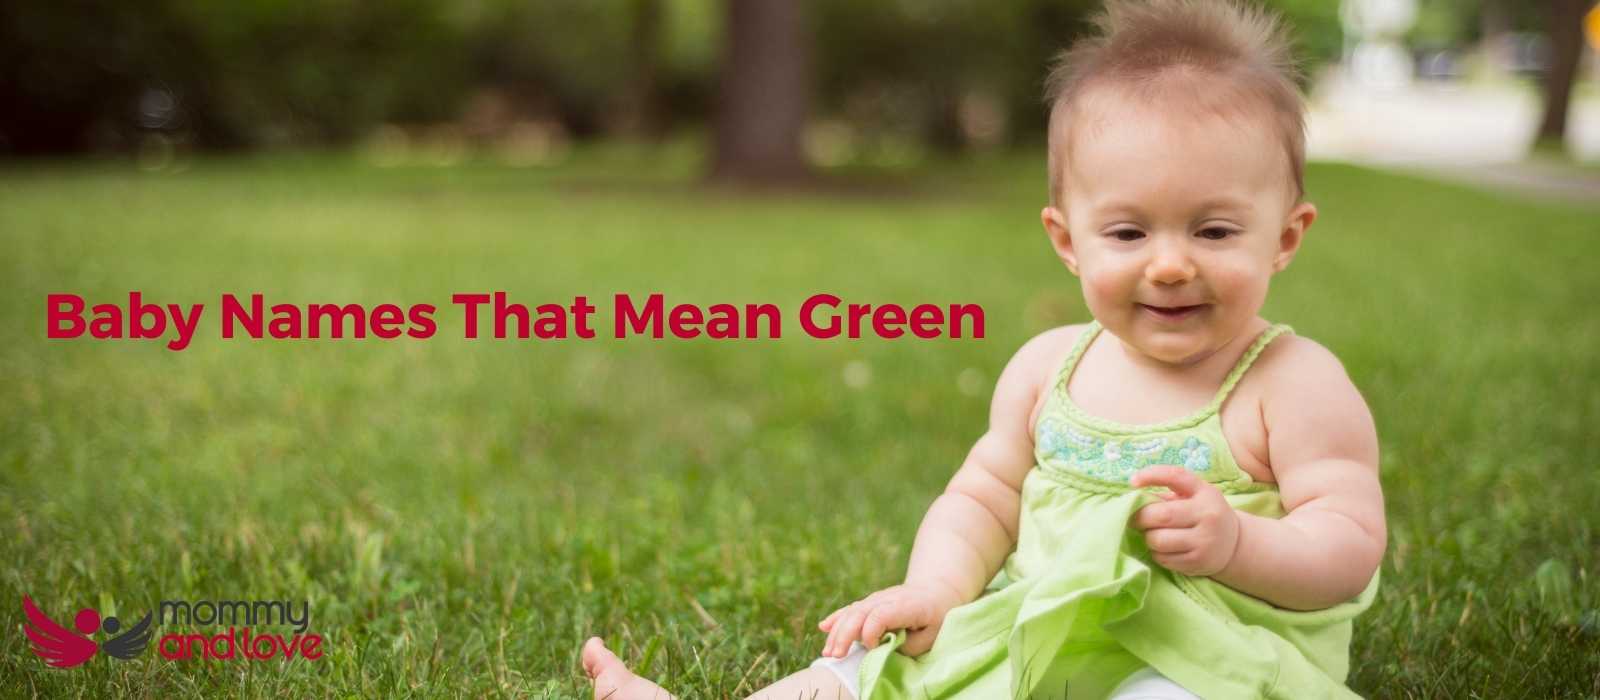 Baby Names That Mean Green: Meaningful and Nature-Inspired Names for Your  Baby - Raising Families Naturally